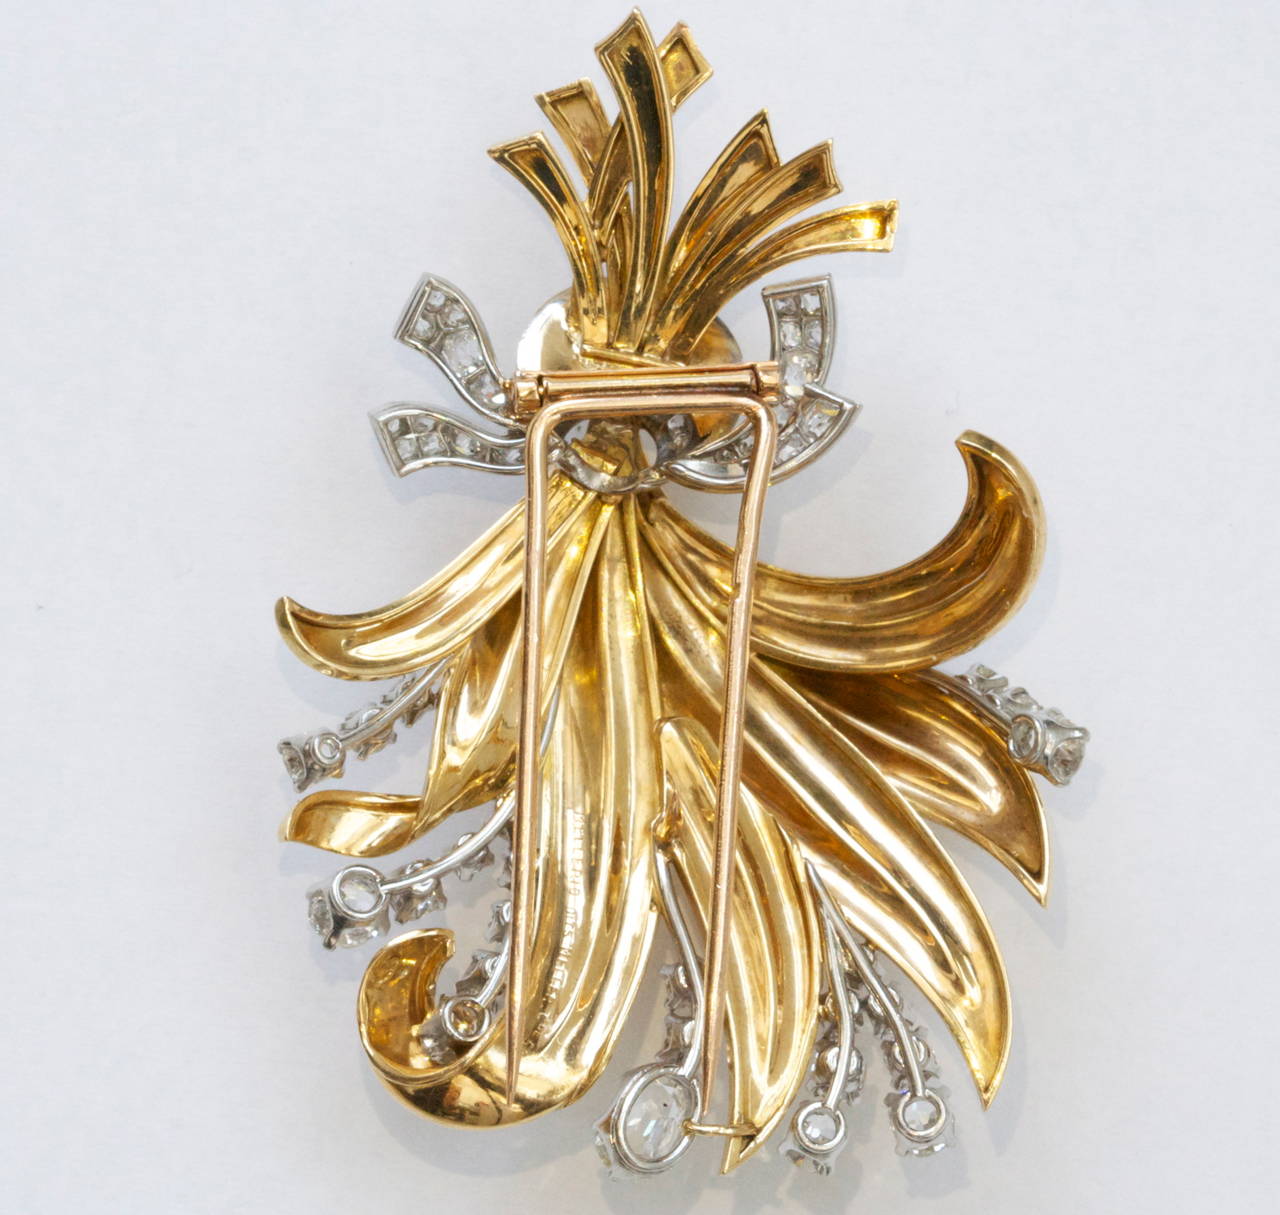 The Mellerio French jewelry house was established in 1613 and claims to be the oldest family company in Europe; and is known to be the oldest French jewelry house. On display, Mellerio has created a bouquet motif. Elegant supple gold leaves